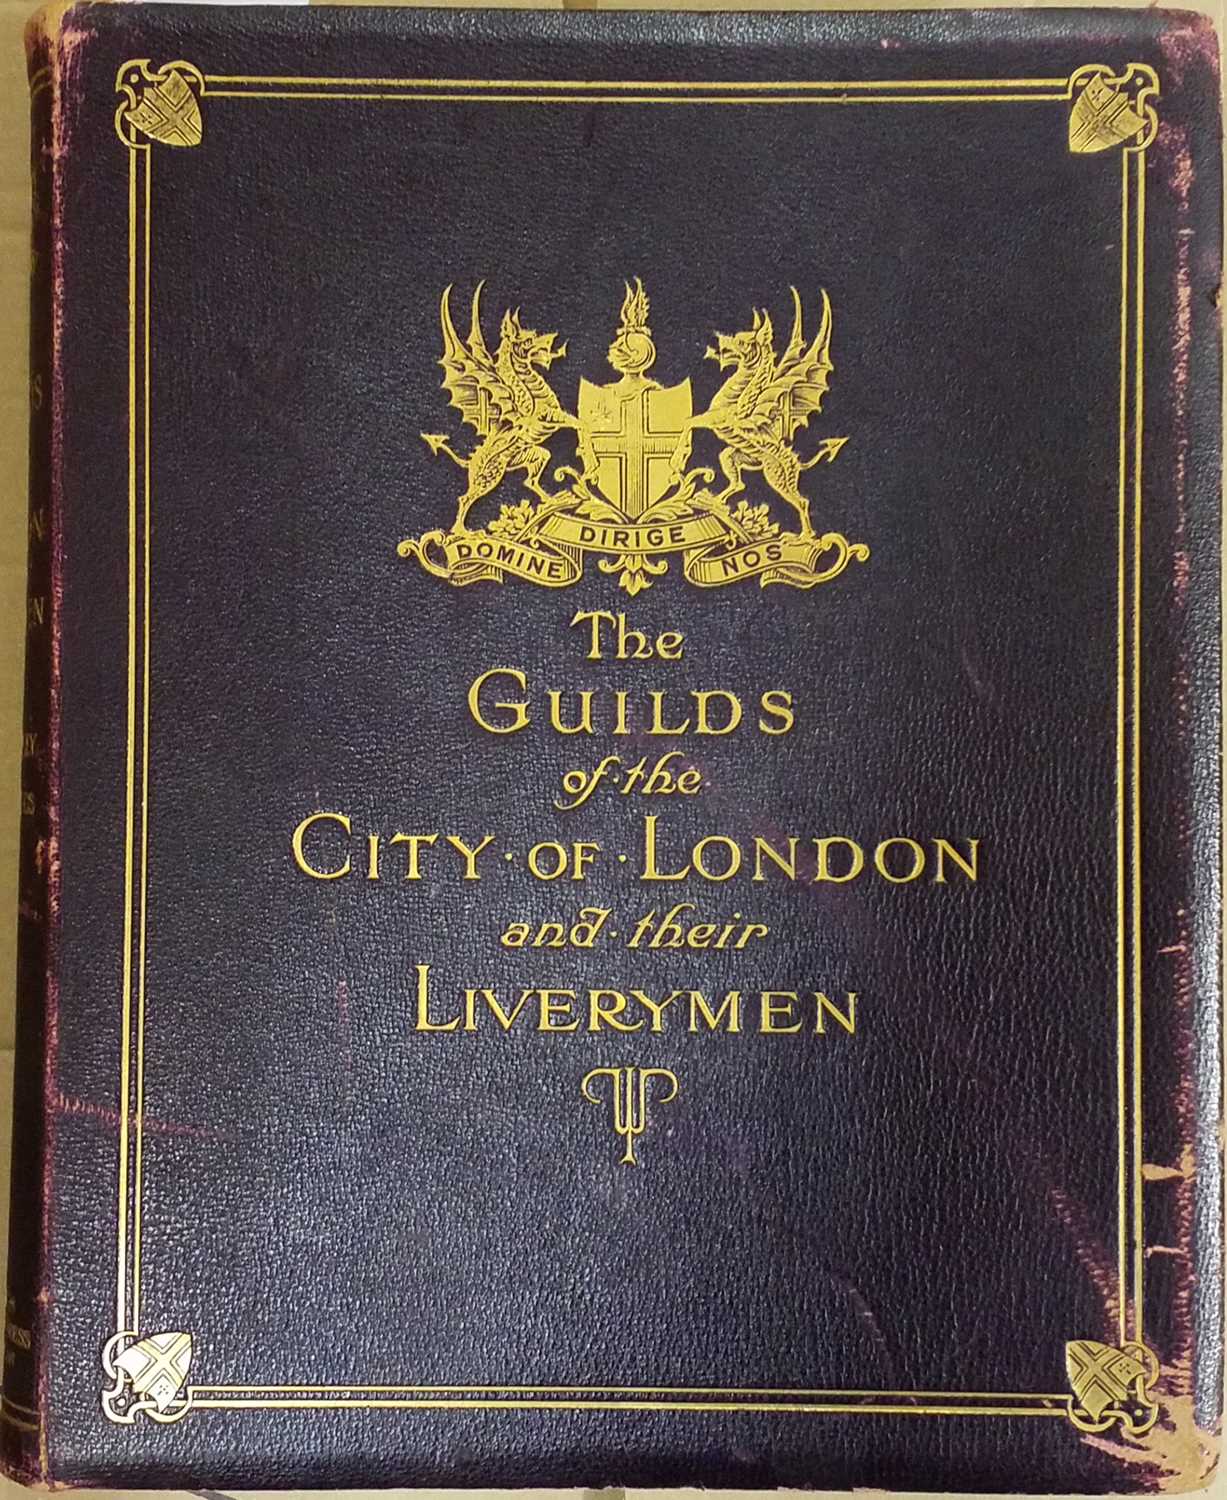 Lot 286 - London. A large collection of London Companies & London reference